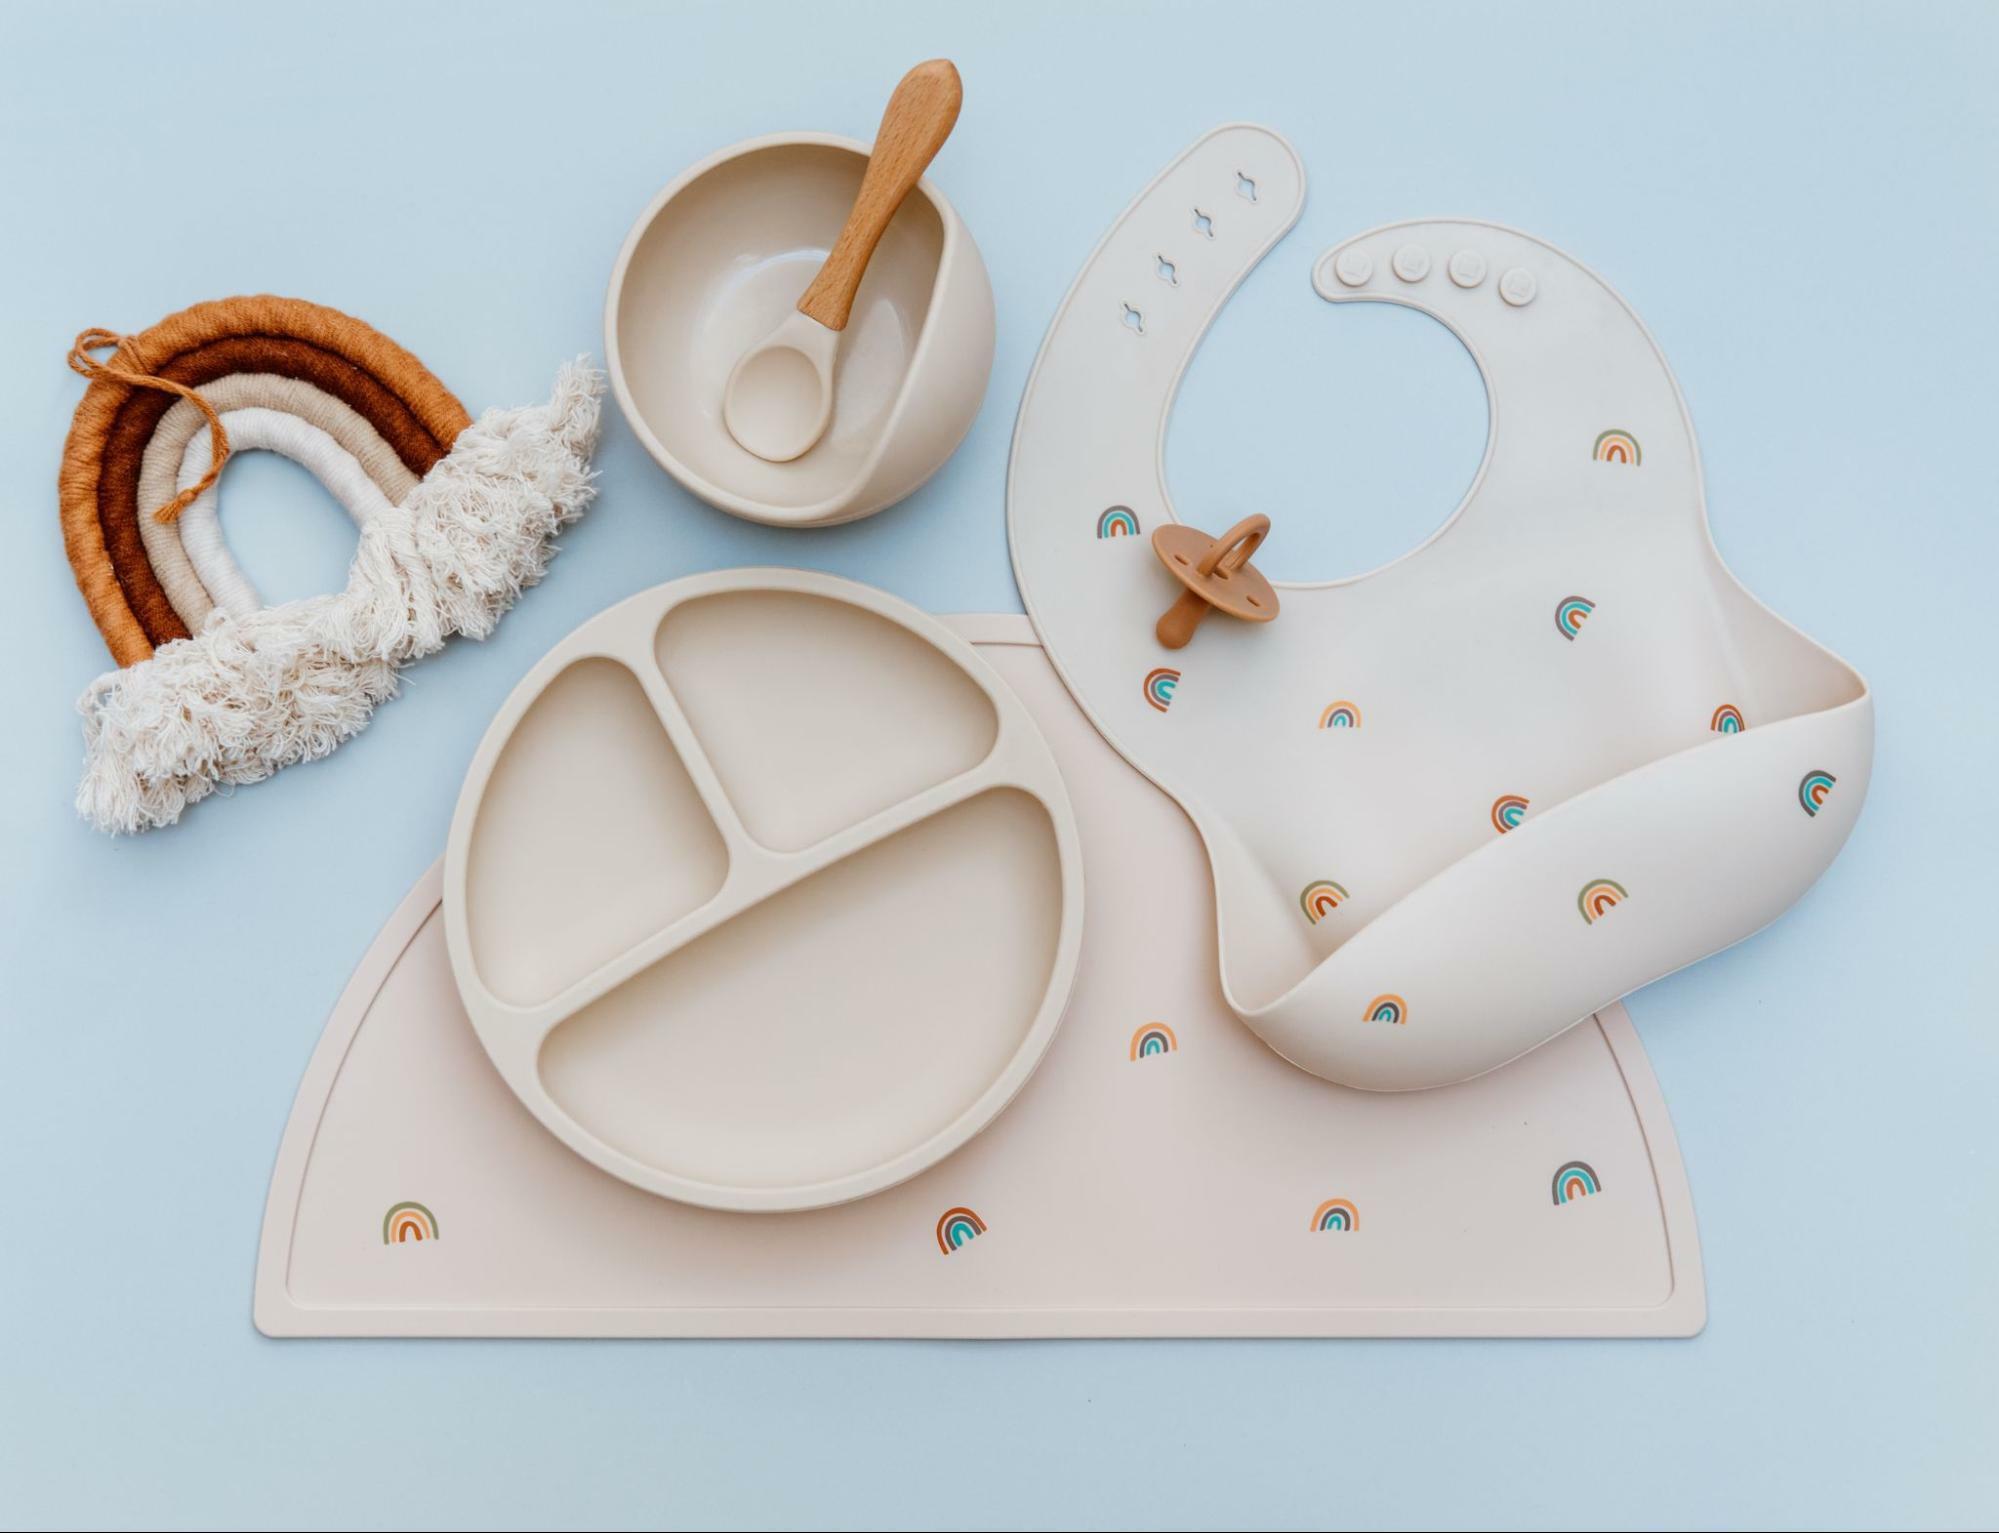 Simple style is one of the key points in choosing baby tableware